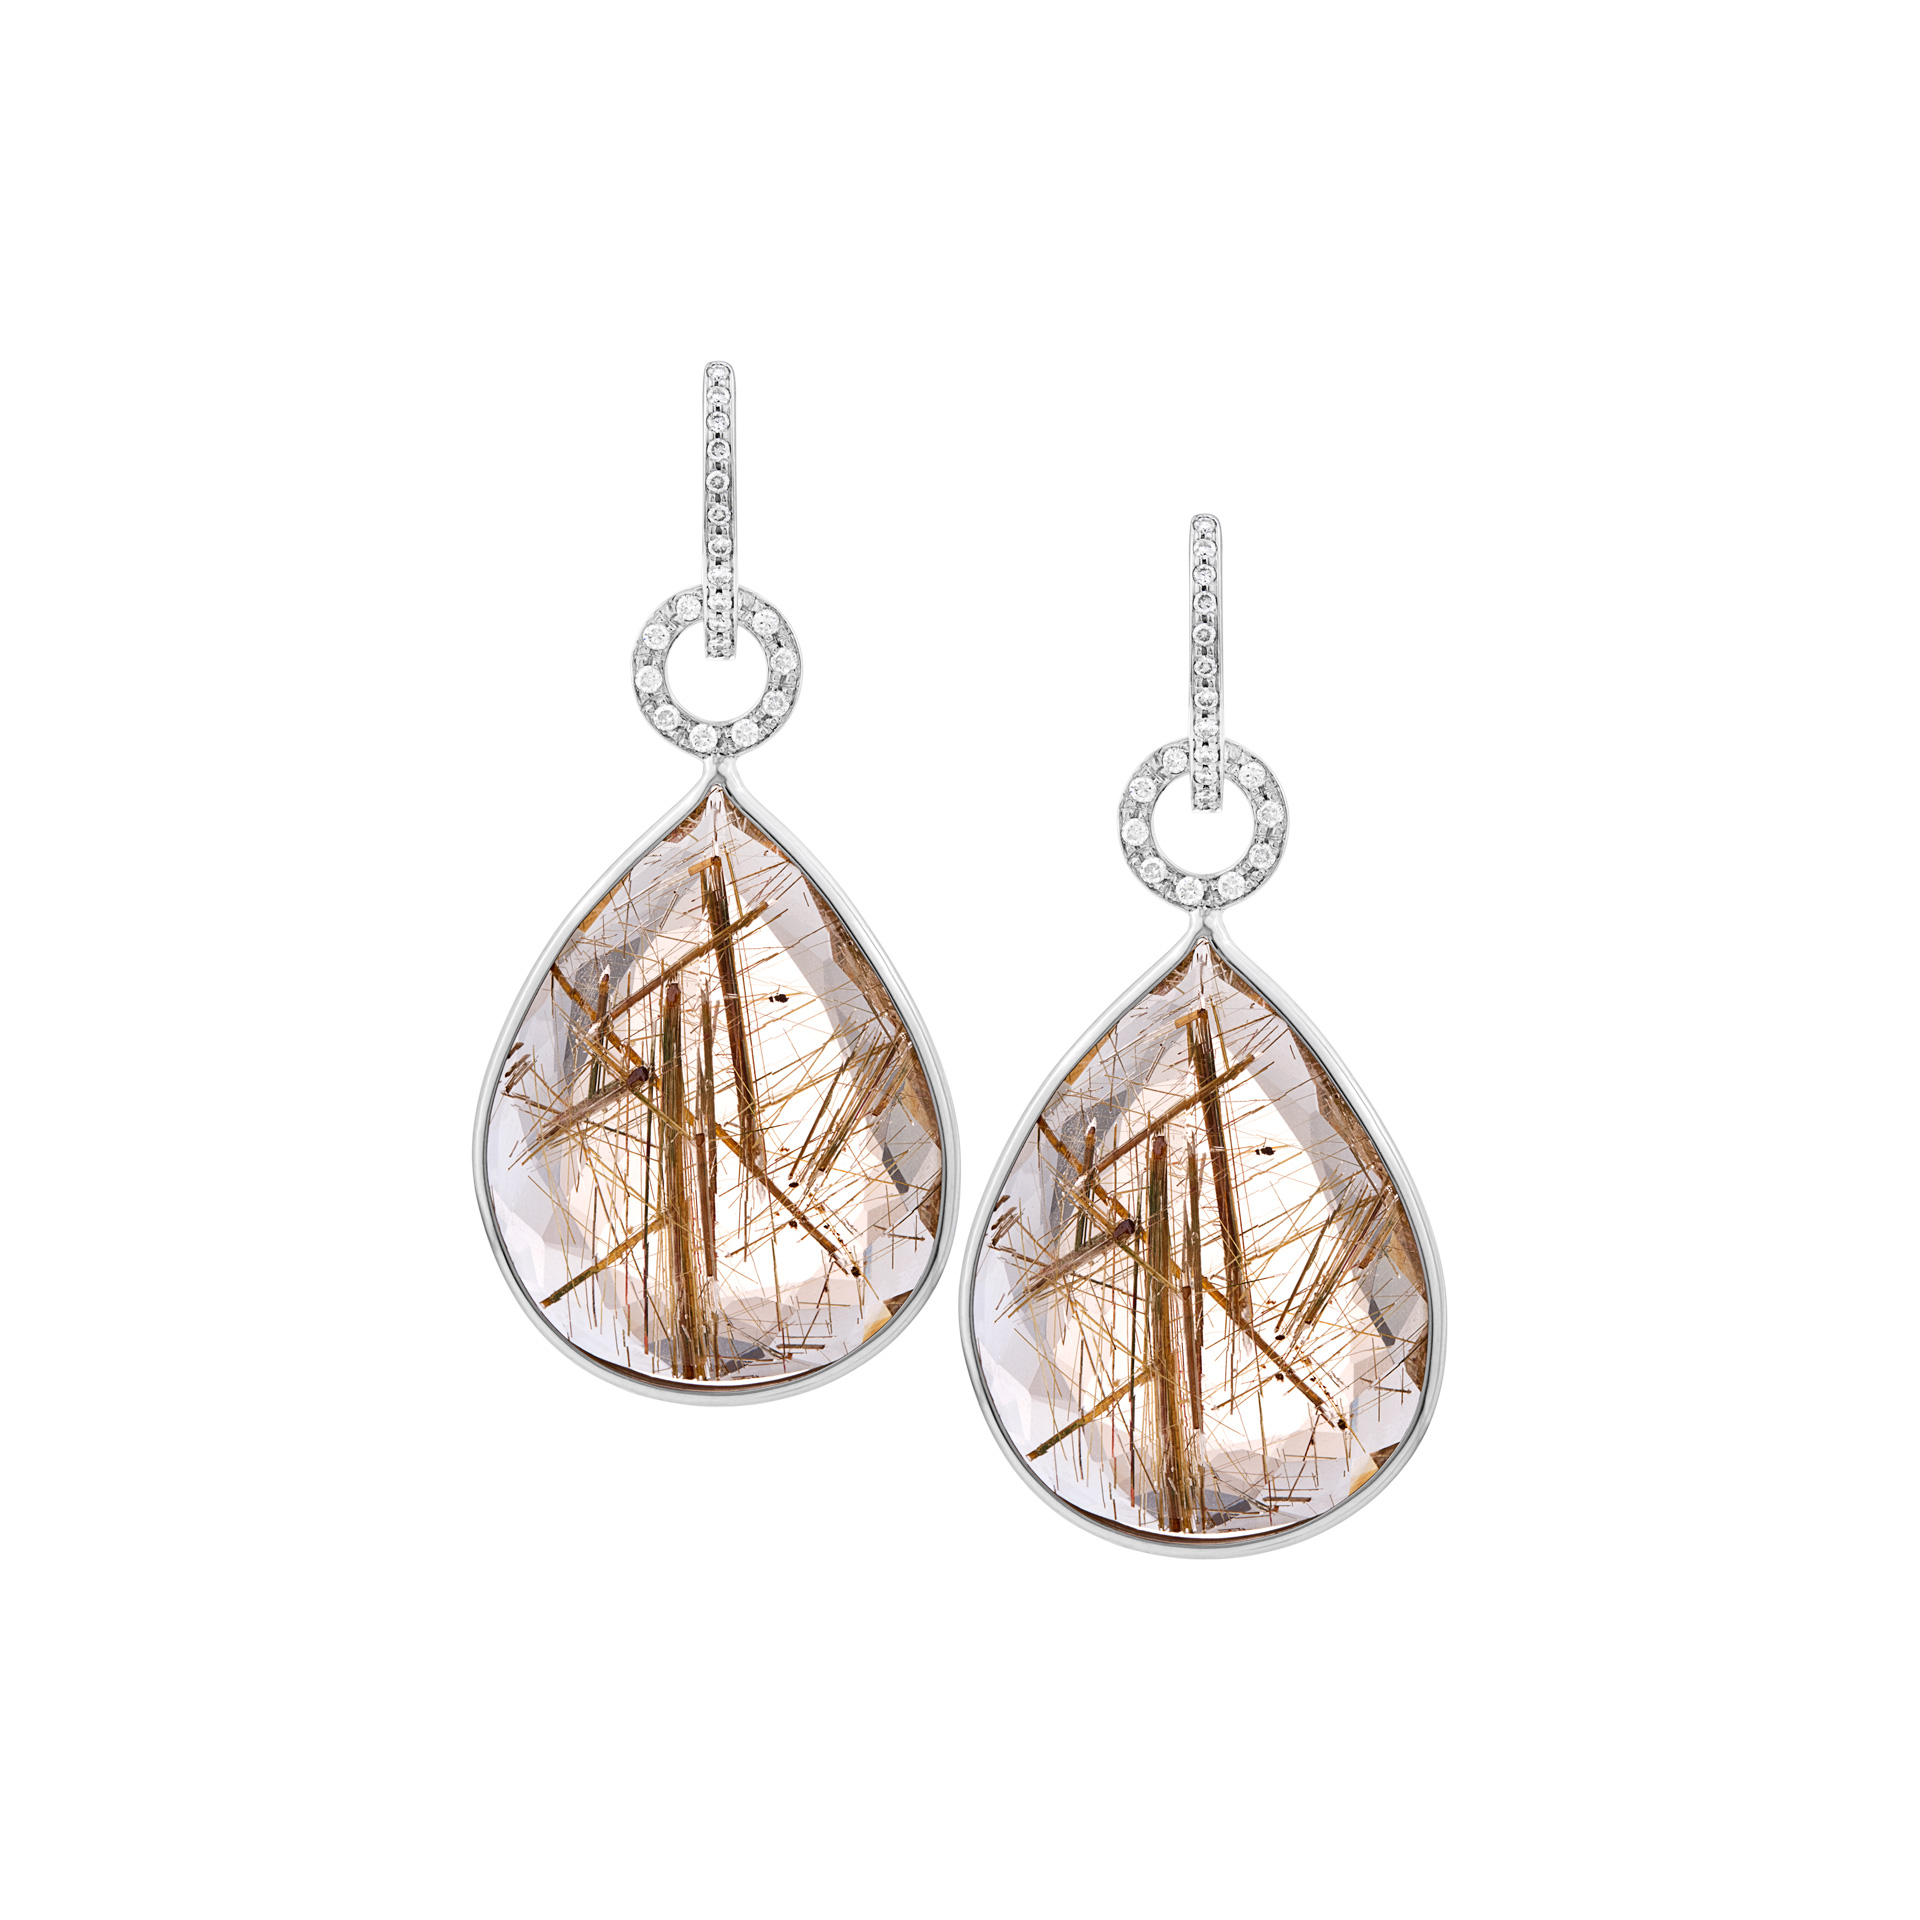 Earrings with rutile quartz and diamonds in 18K white gold